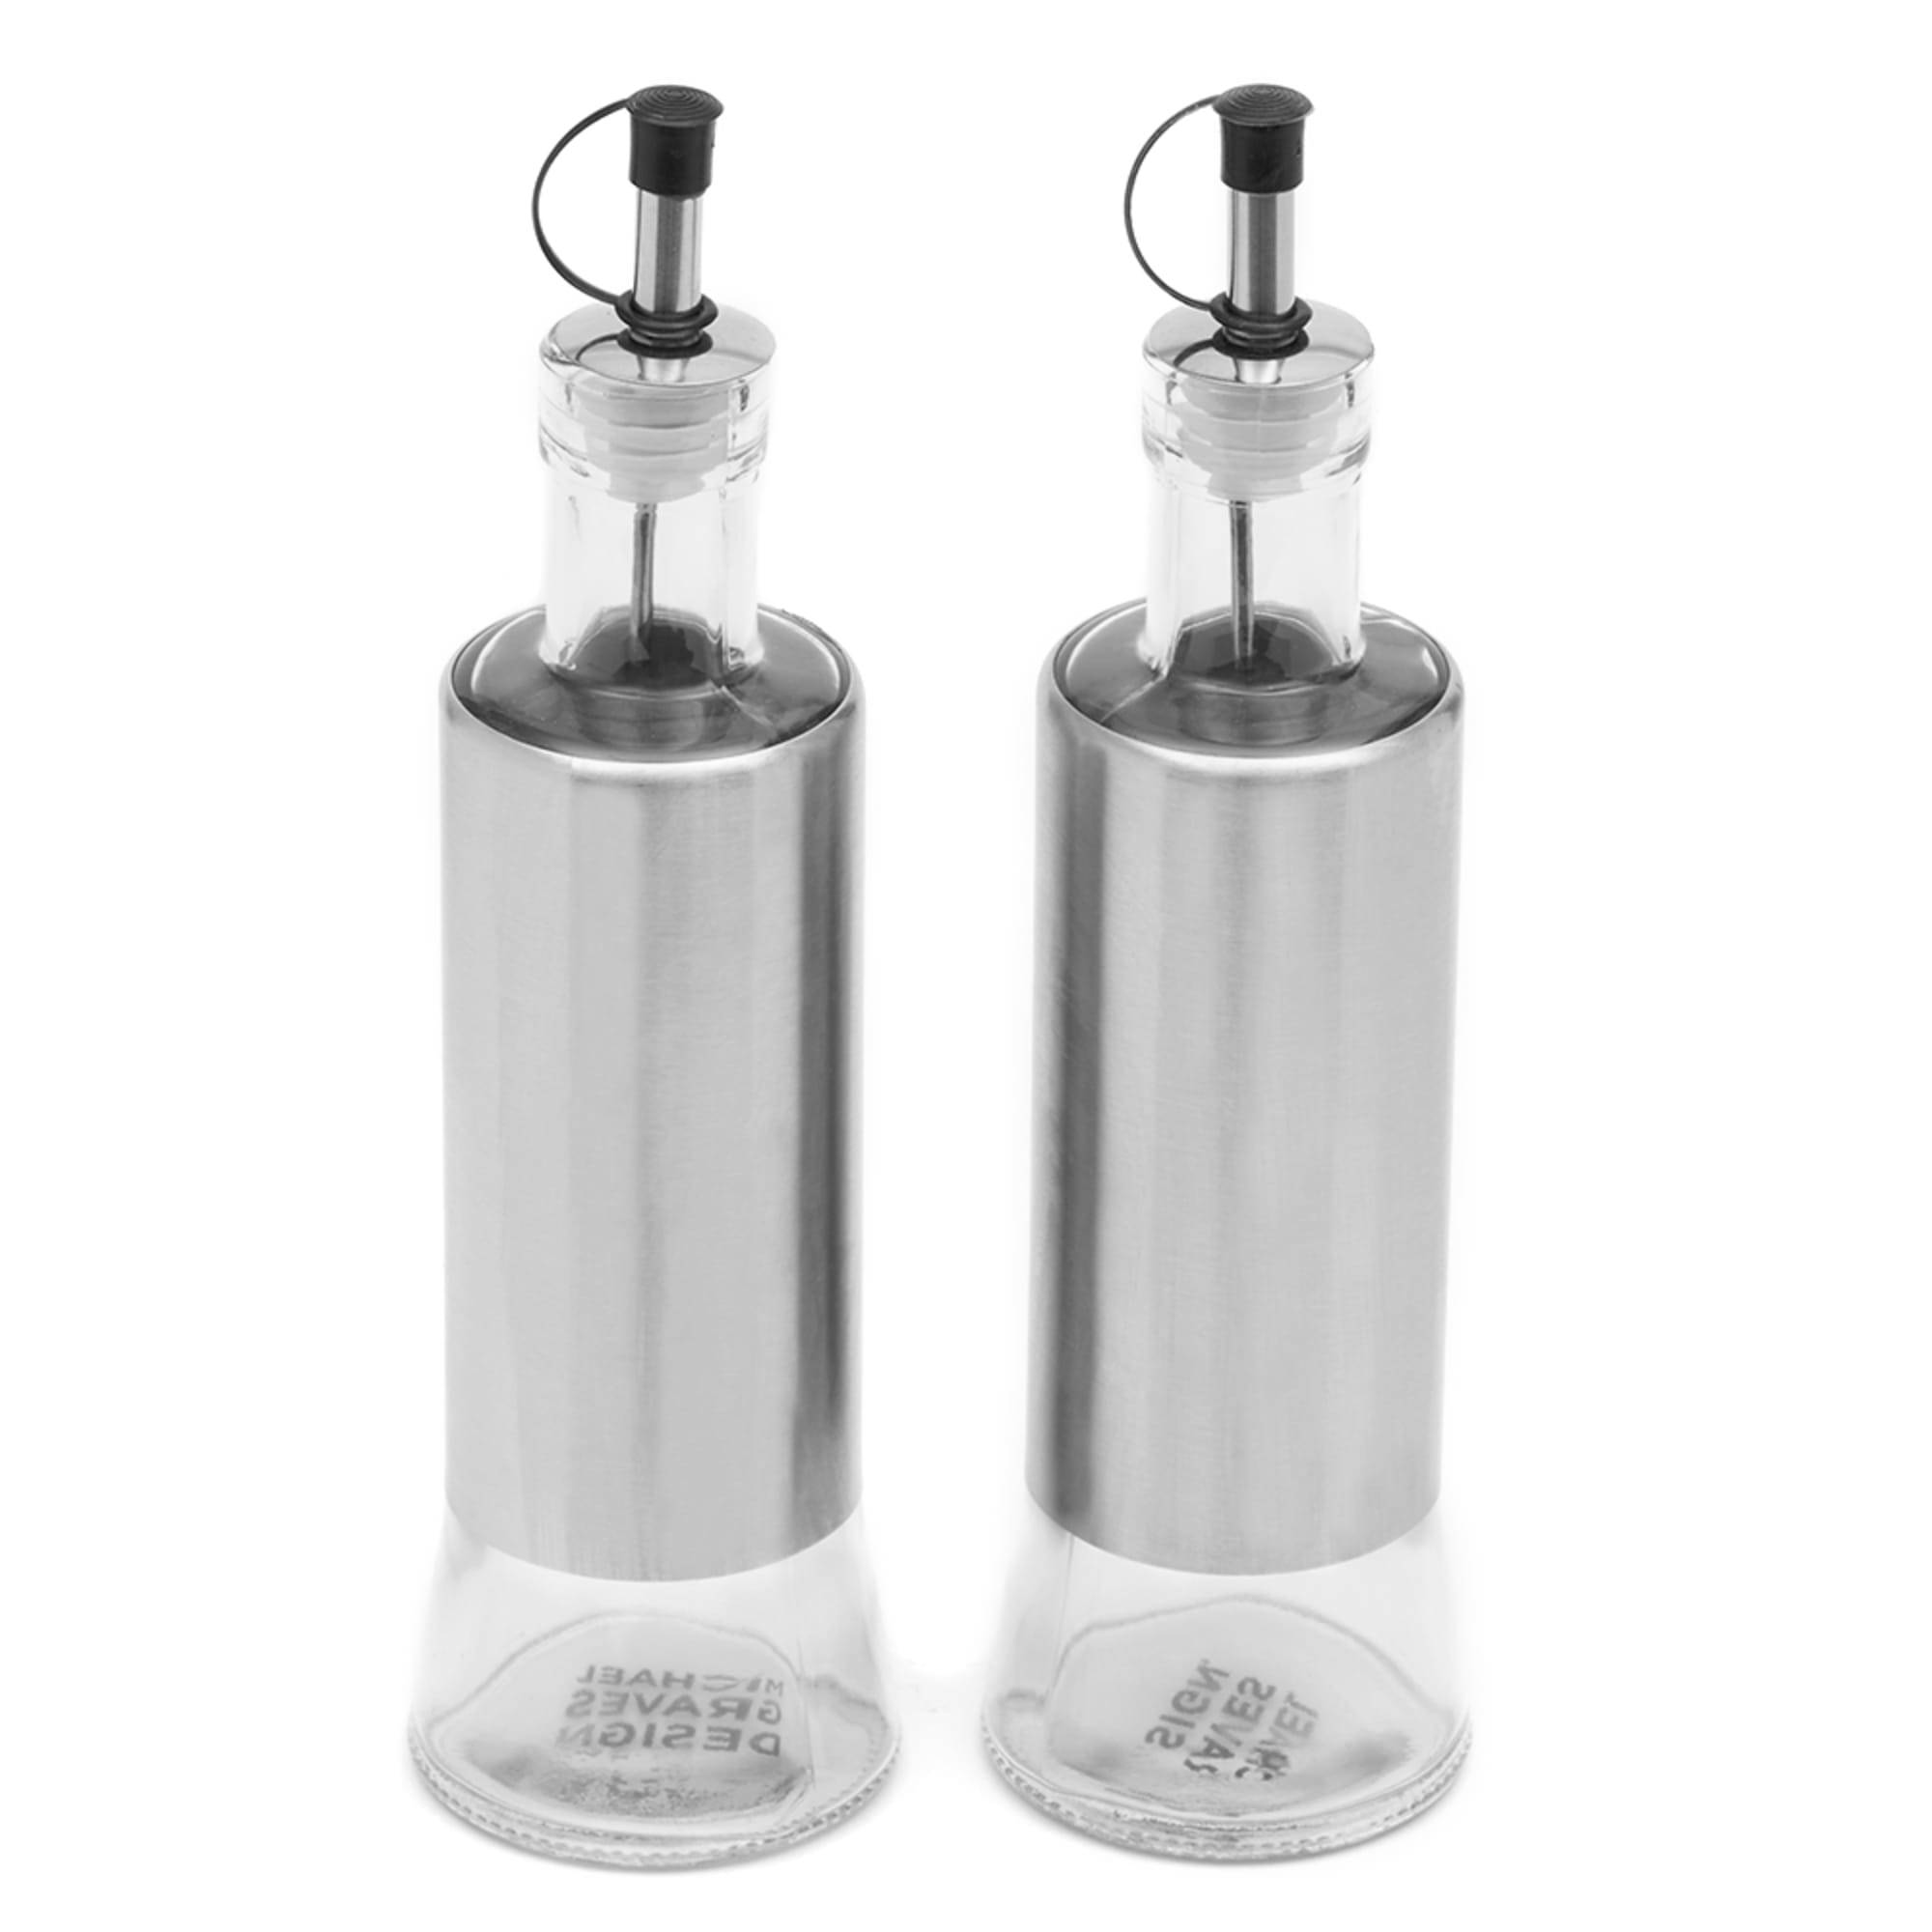 Essence 2 Piece 10 Ounce Stainless Steel Oil and Vinegar Set with Clear Glass Bottoms, Silver